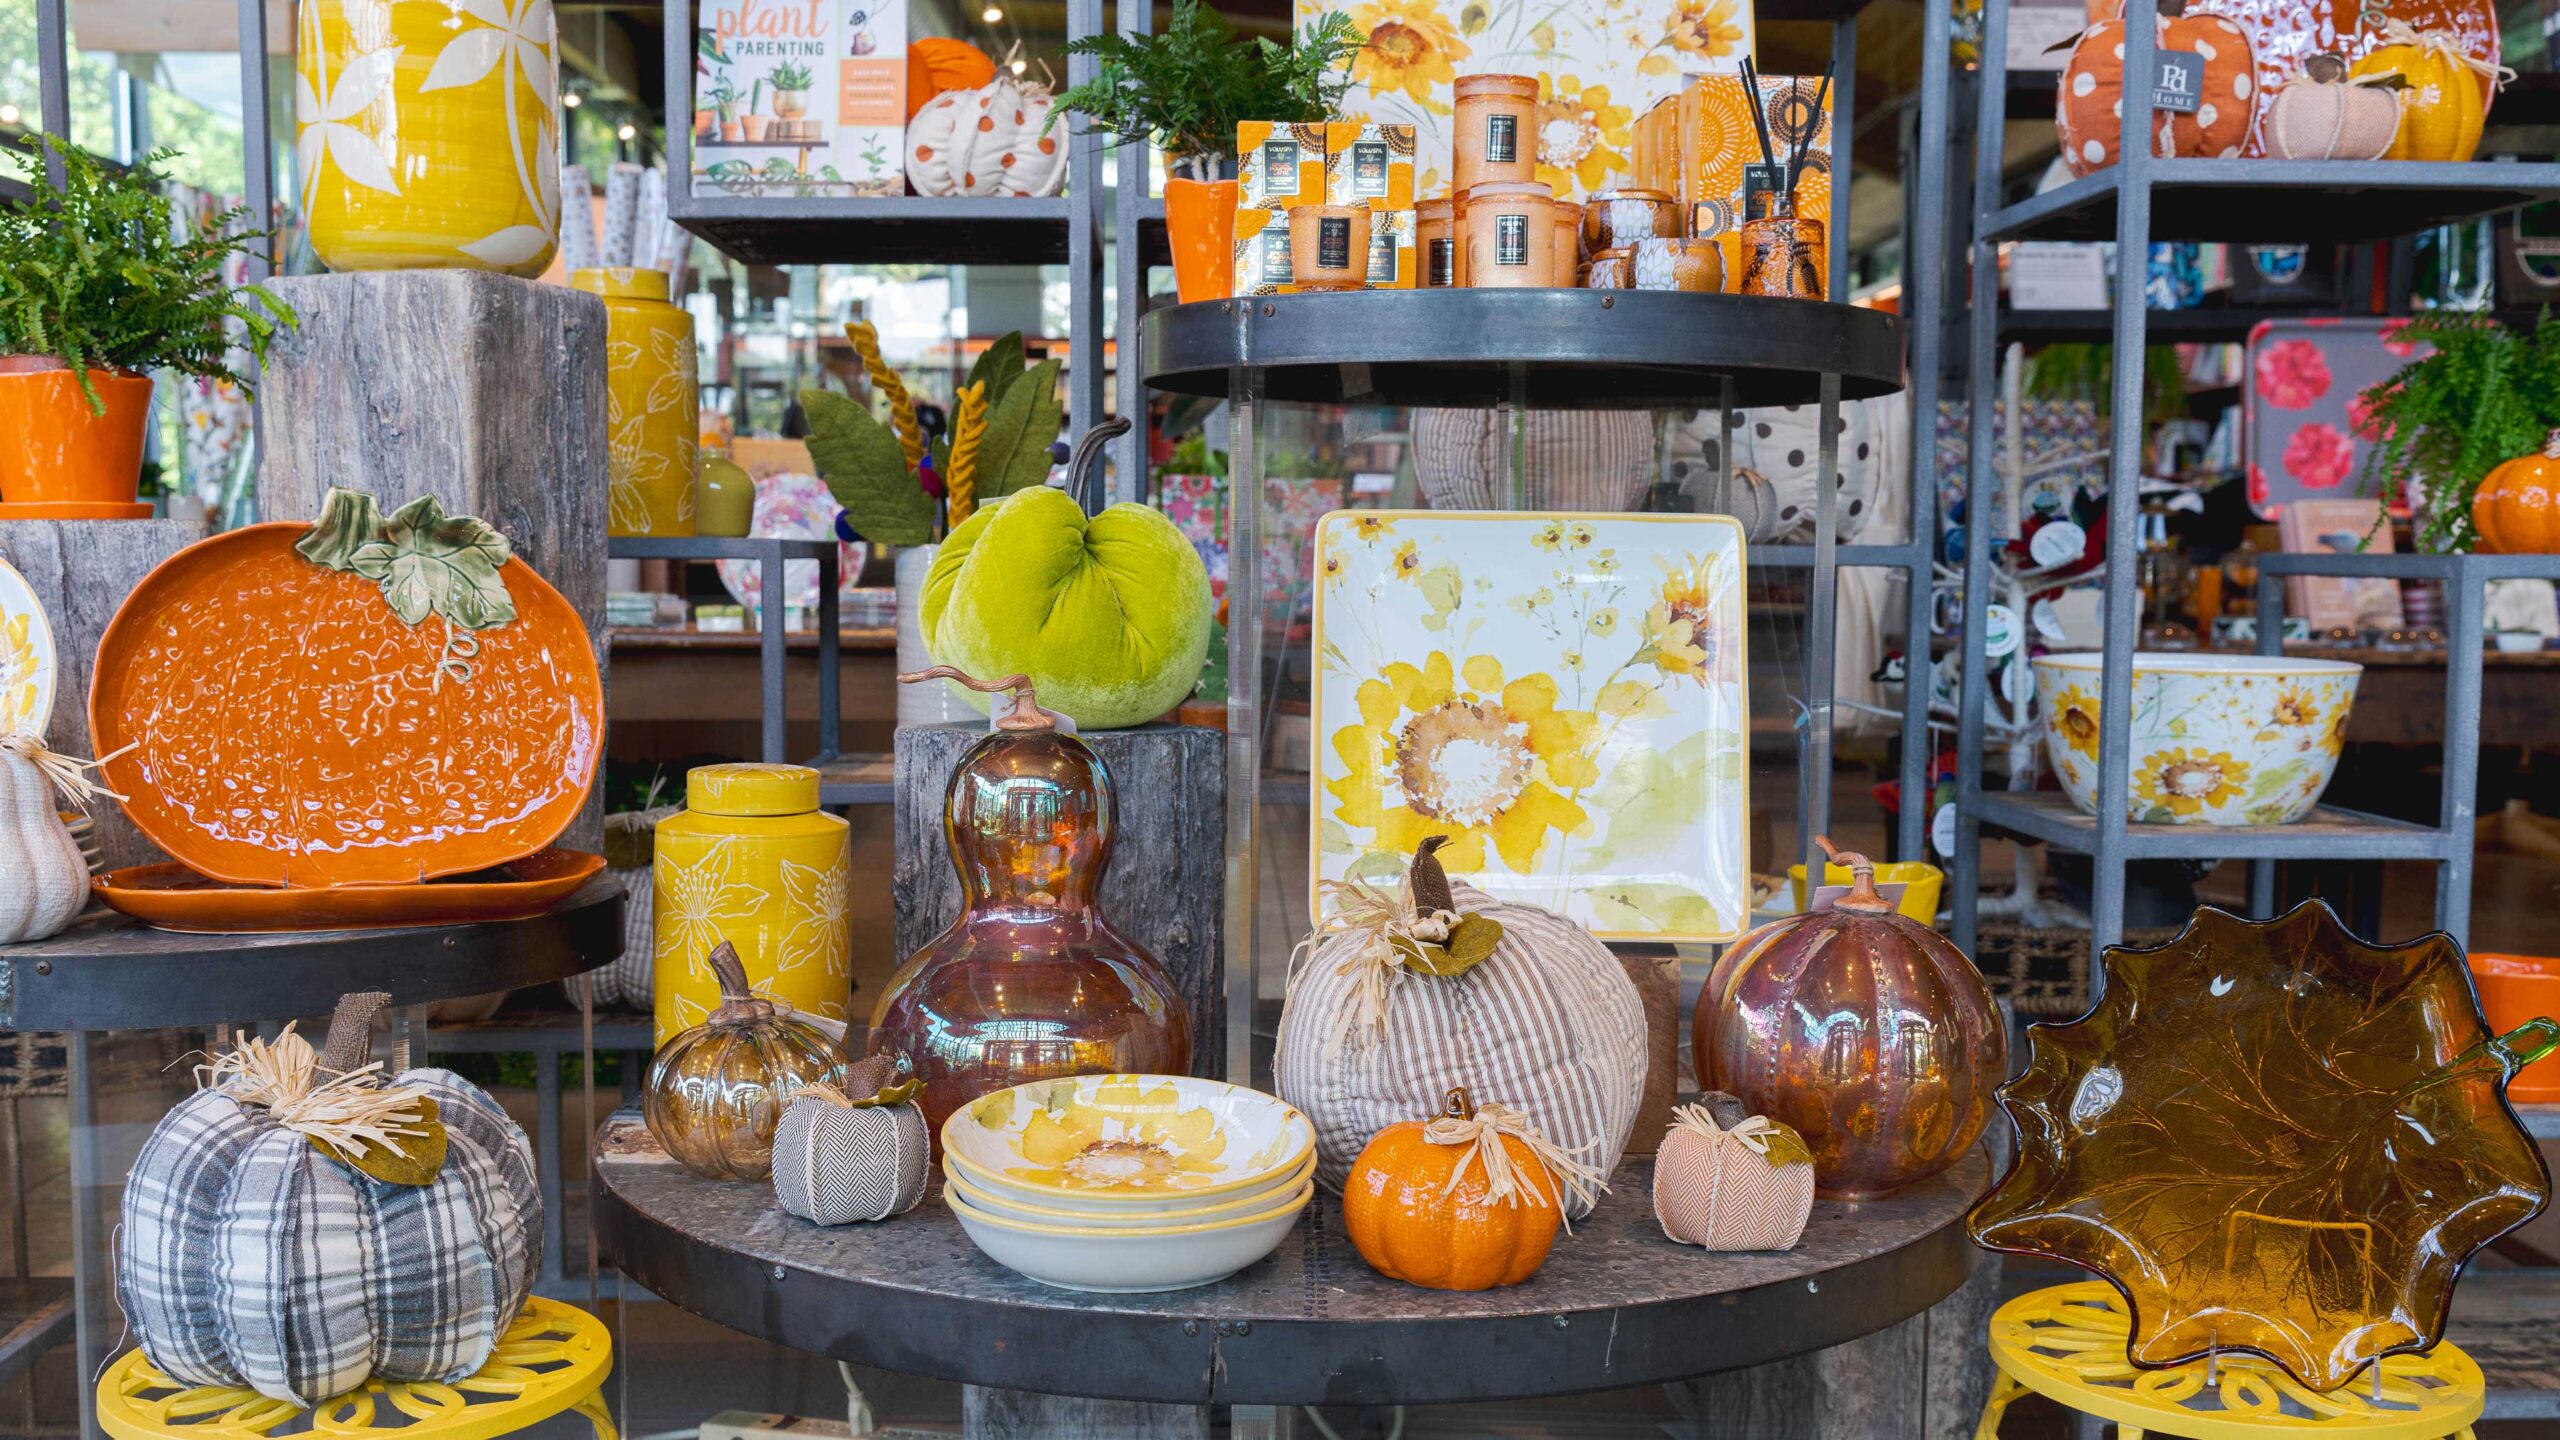 An arrangement of orange, black, green, and yellow Halloween goods and decor arranged on a shop table